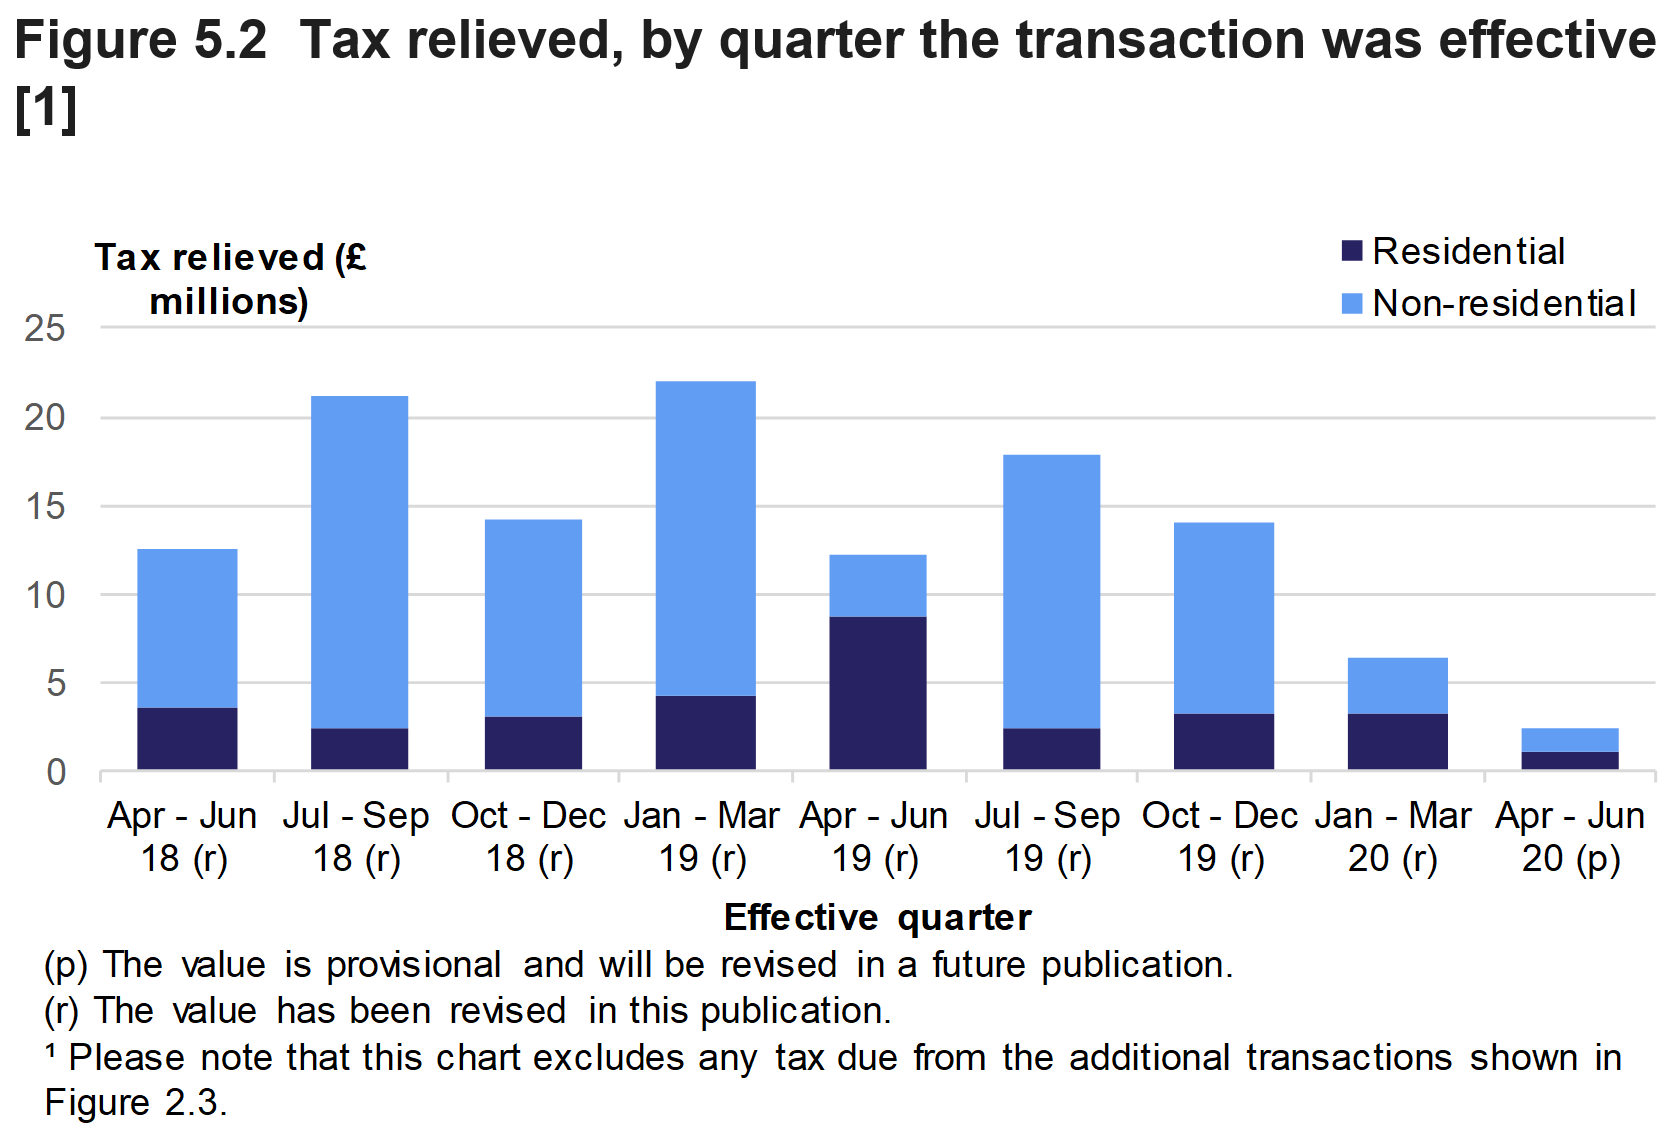 Figure 5.2 shows the amount of tax relieved on residential and non-residential transactions effective, by type of relief and quarter the transaction was effective.